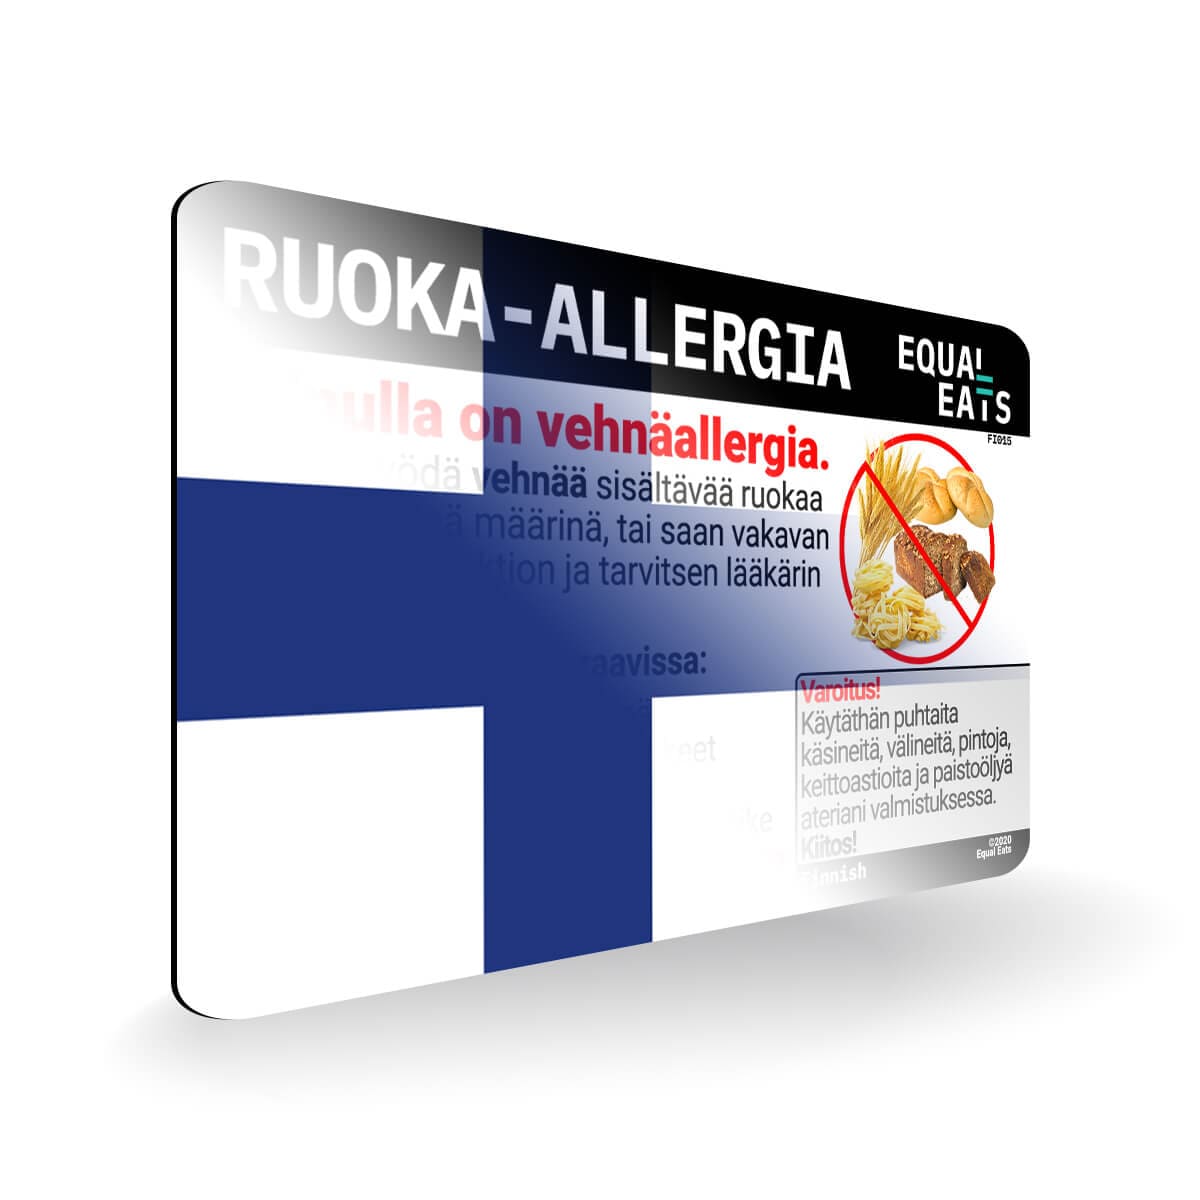 Wheat Allergy in Finnish. Wheat Allergy Card for Finland